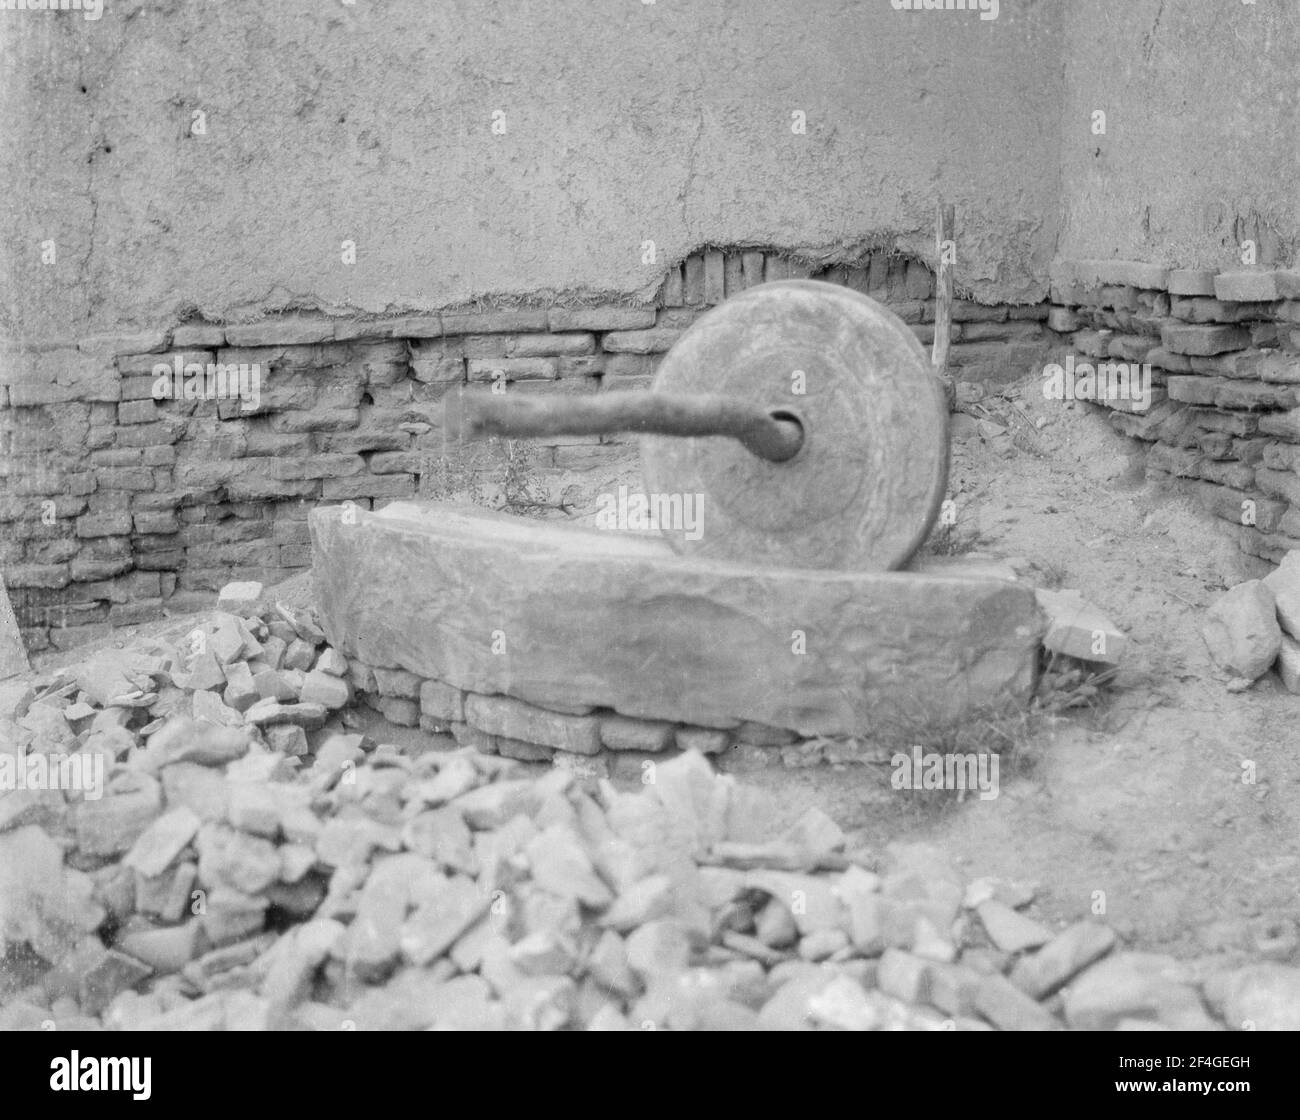 https://c8.alamy.com/comp/2F4GEGH/stone-mill-china-ding-xian-china-dingzhou-shi-china-hebei-sheng-china-1931-from-the-sidney-d-gamble-photographs-collection-2F4GEGH.jpg